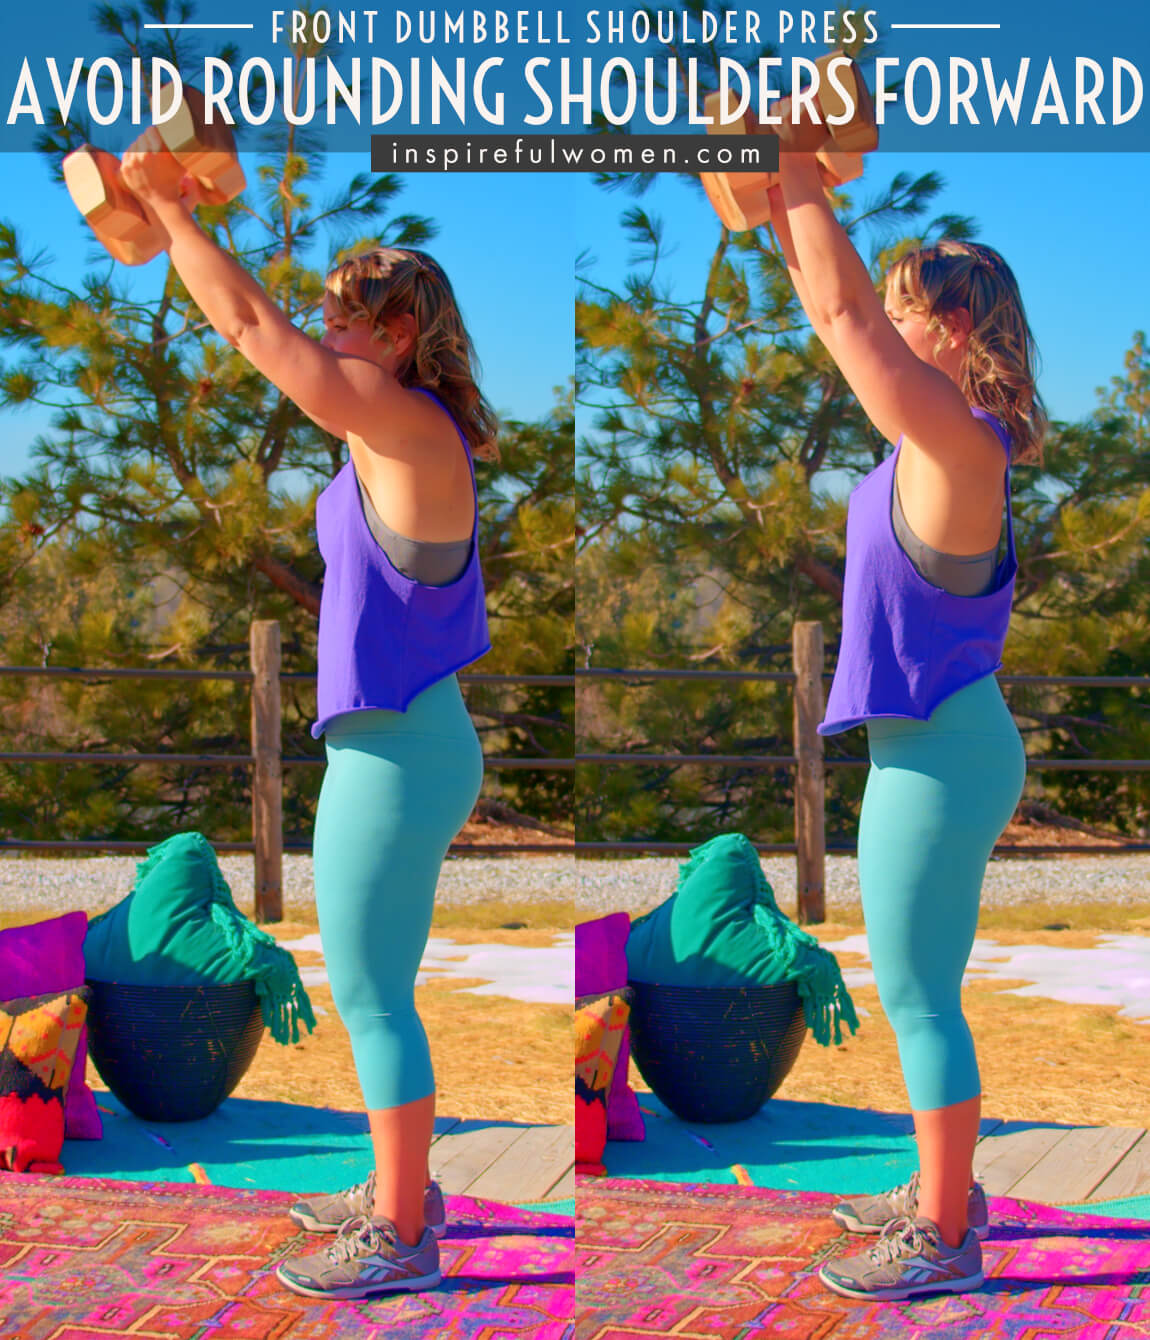 avoid-rounding-shoulders-forward-front-shoulder-press-common-mistakes